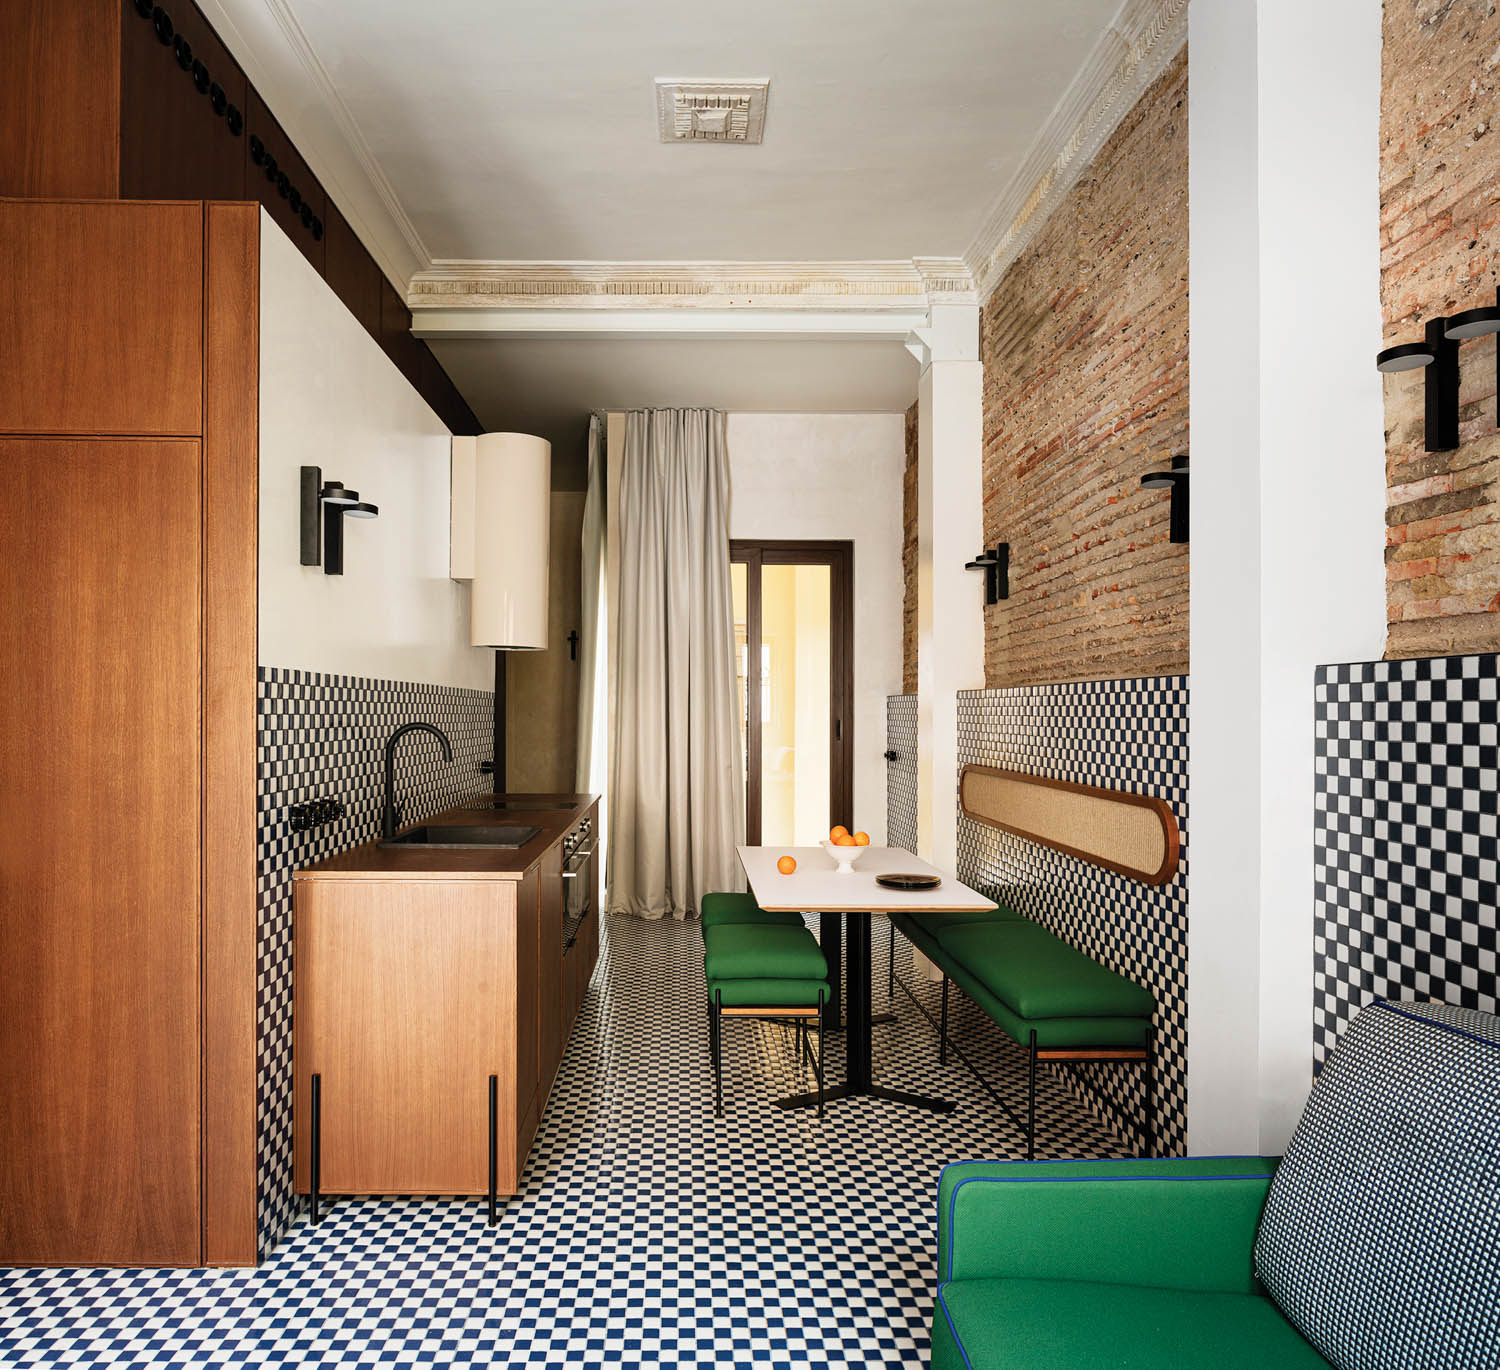 emerald furniture pops against blue and white checkerboard tiles